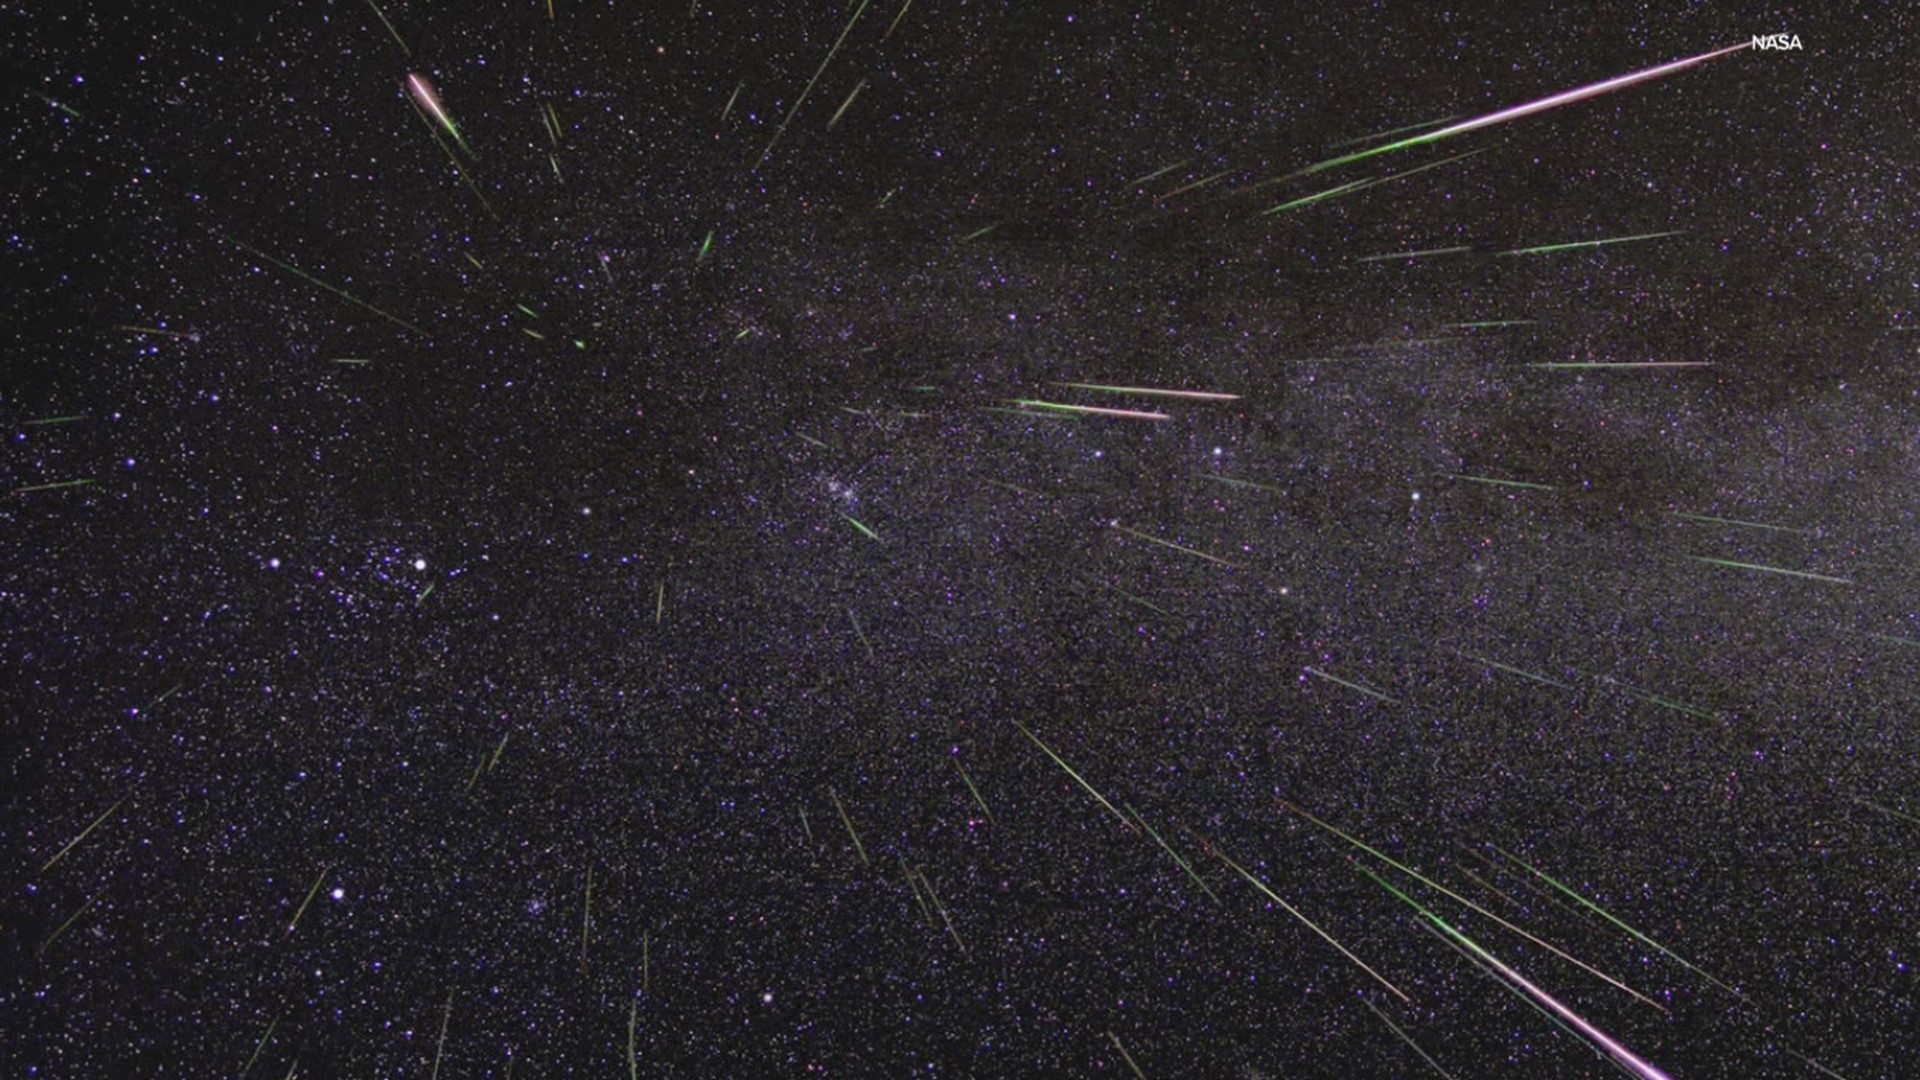 It is expected to be one of the best meteor showers of the year with 50 and 100 meteors per hour.